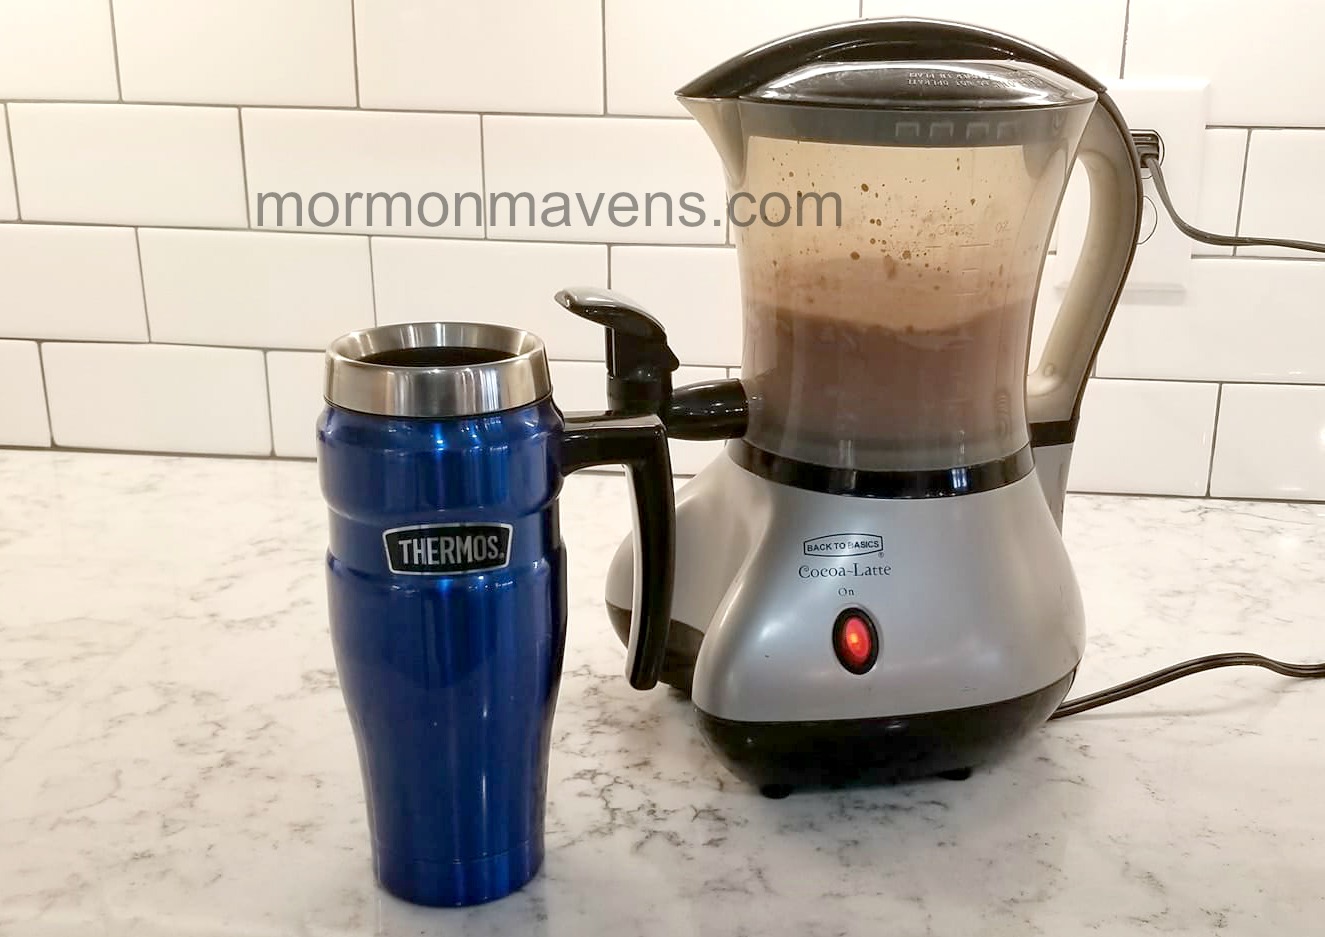  Cocoa Latte Hot Drink Maker By Back to Basics: Home & Kitchen